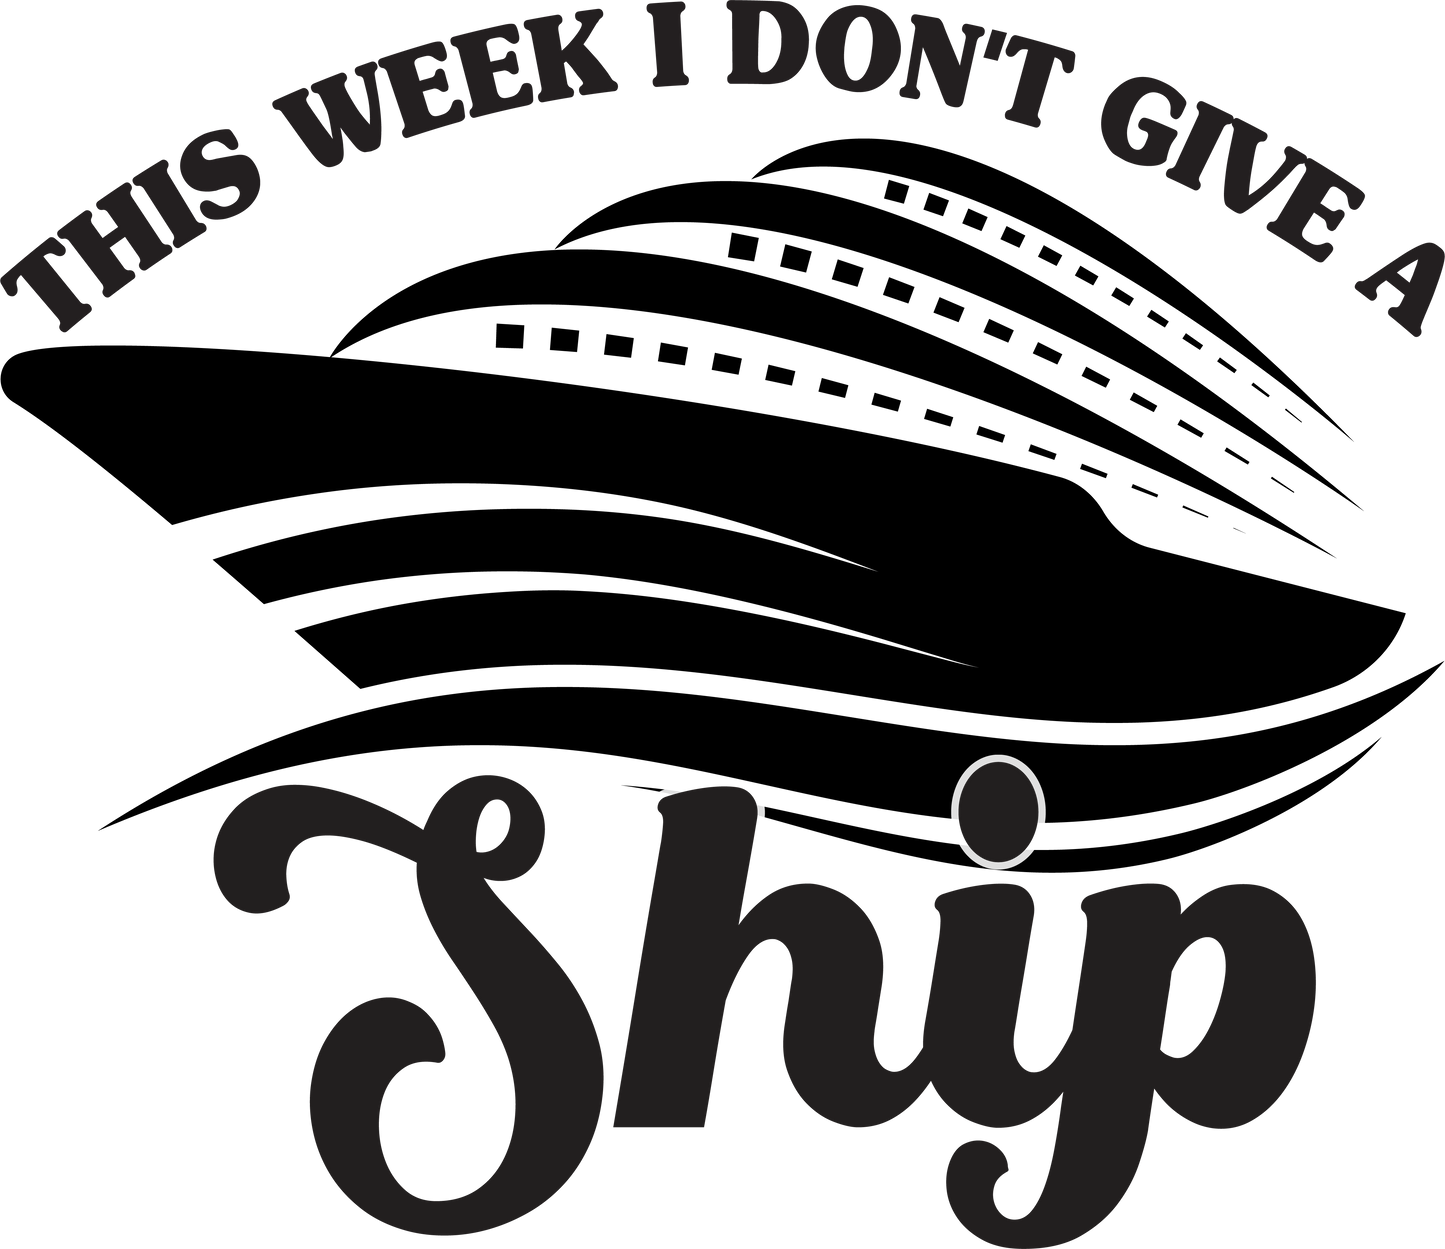 DONT GIVE A SHIP